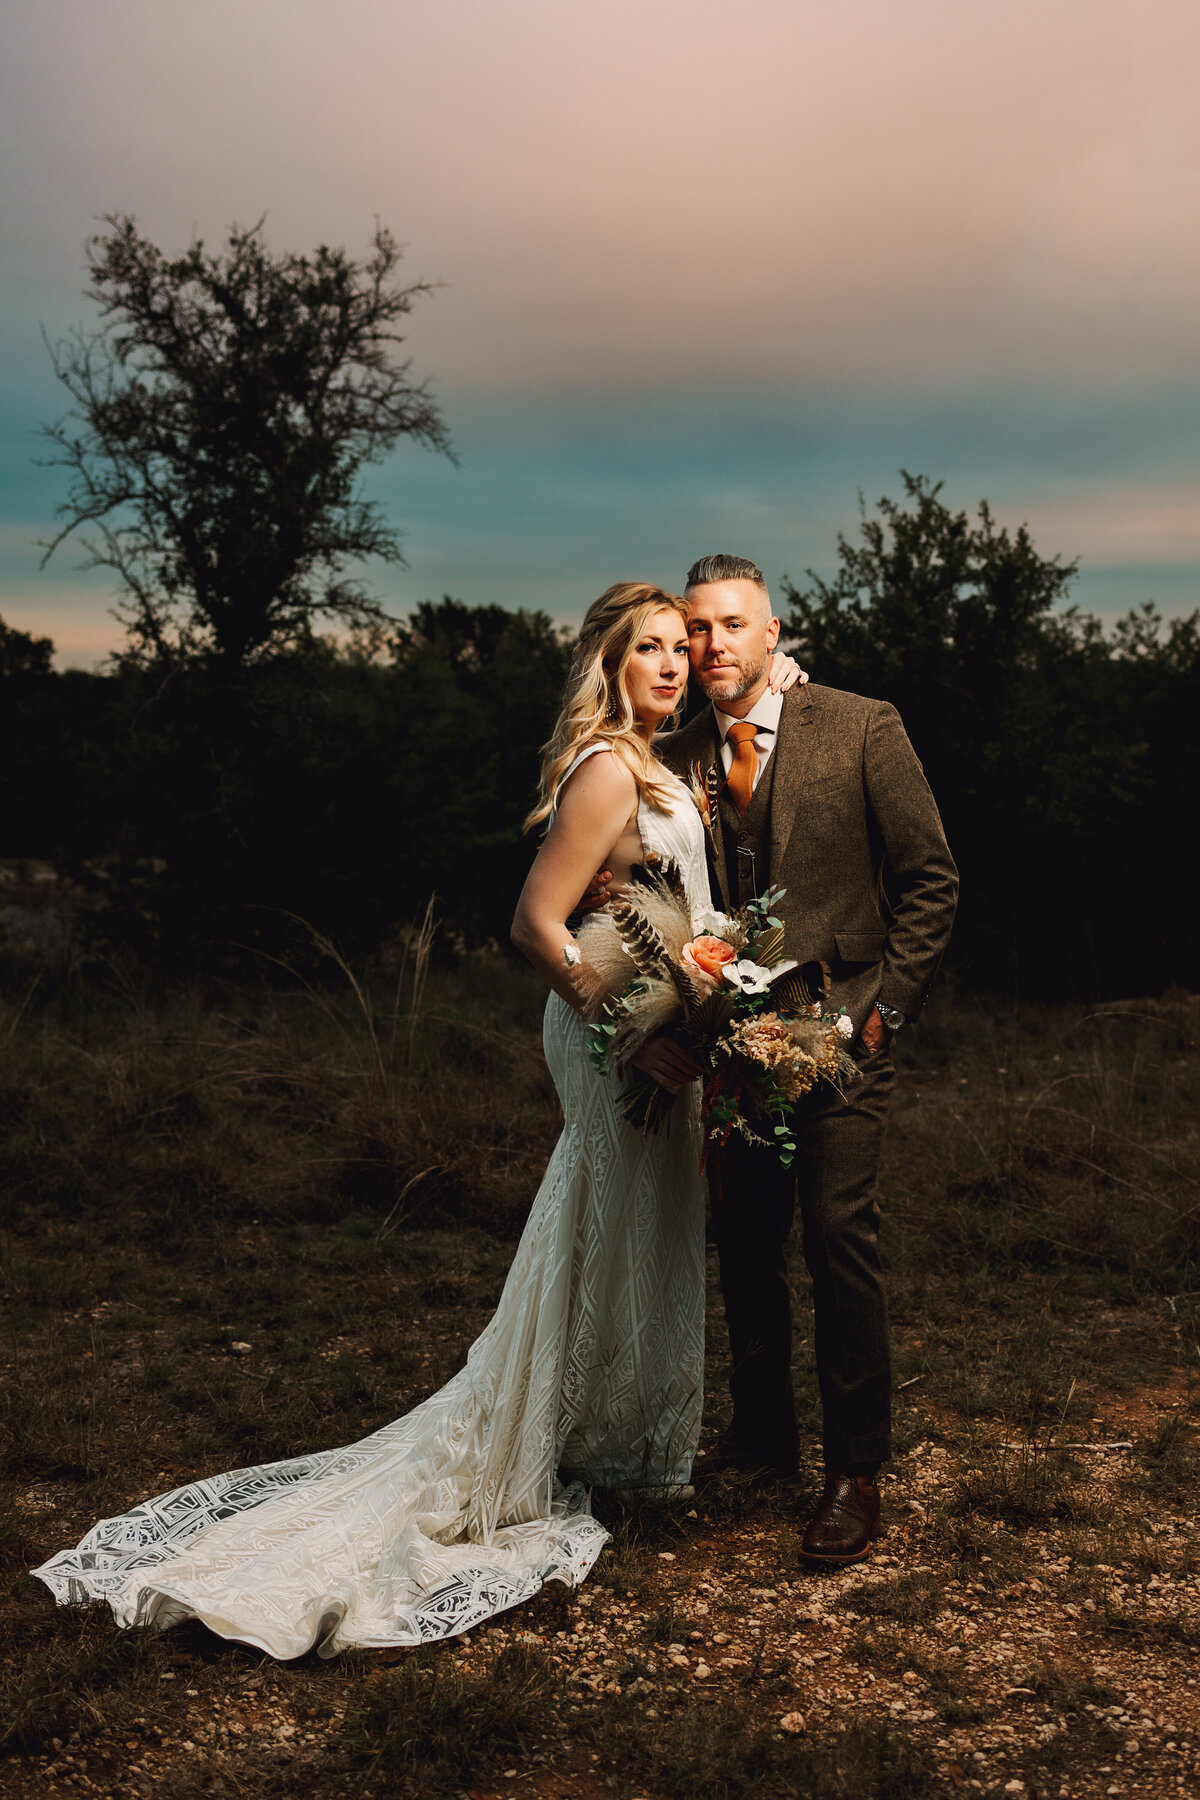 Bash into love at Vista West Ranch. A boho chic party wedding in Dripping Springs, Texas, where romance meets adventure, and every detail is a celebration of your unique connection.